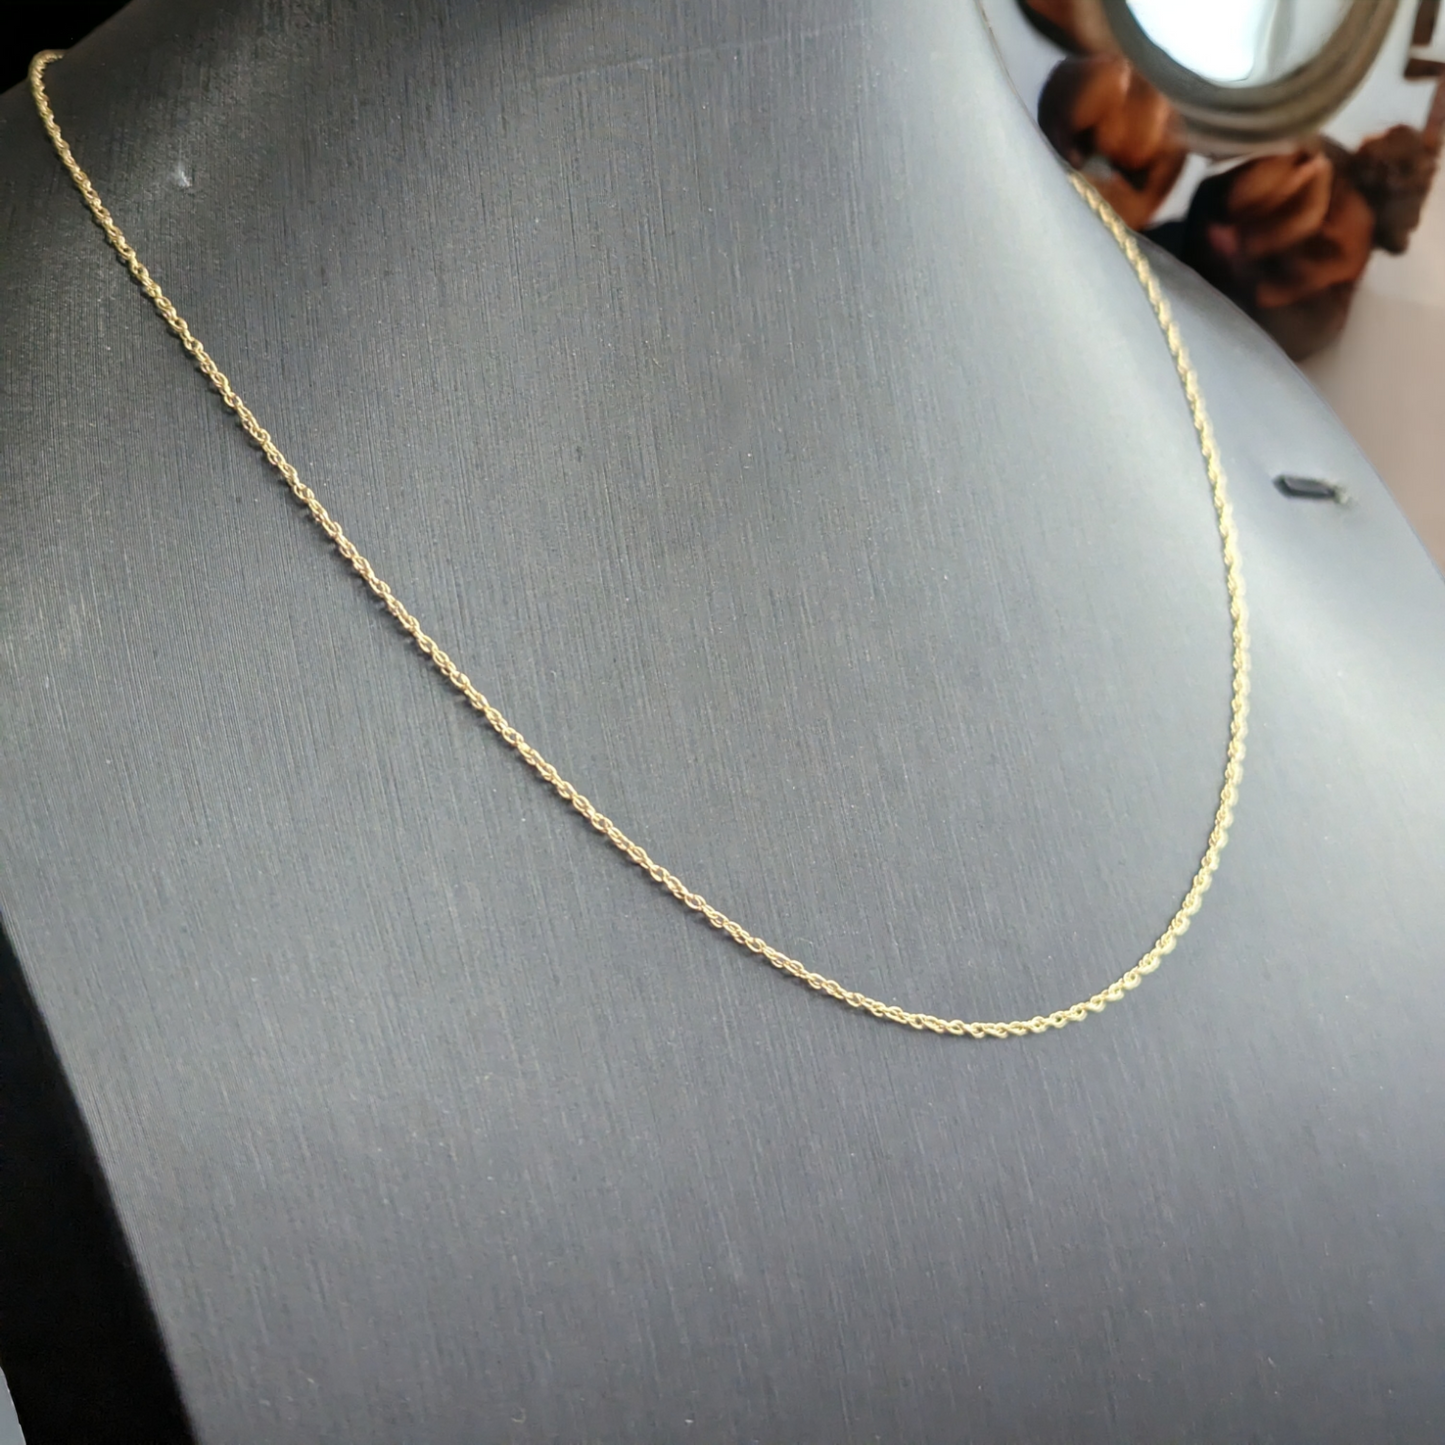 Vintage 14k Rope Style Gold Delicate Chain Necklace